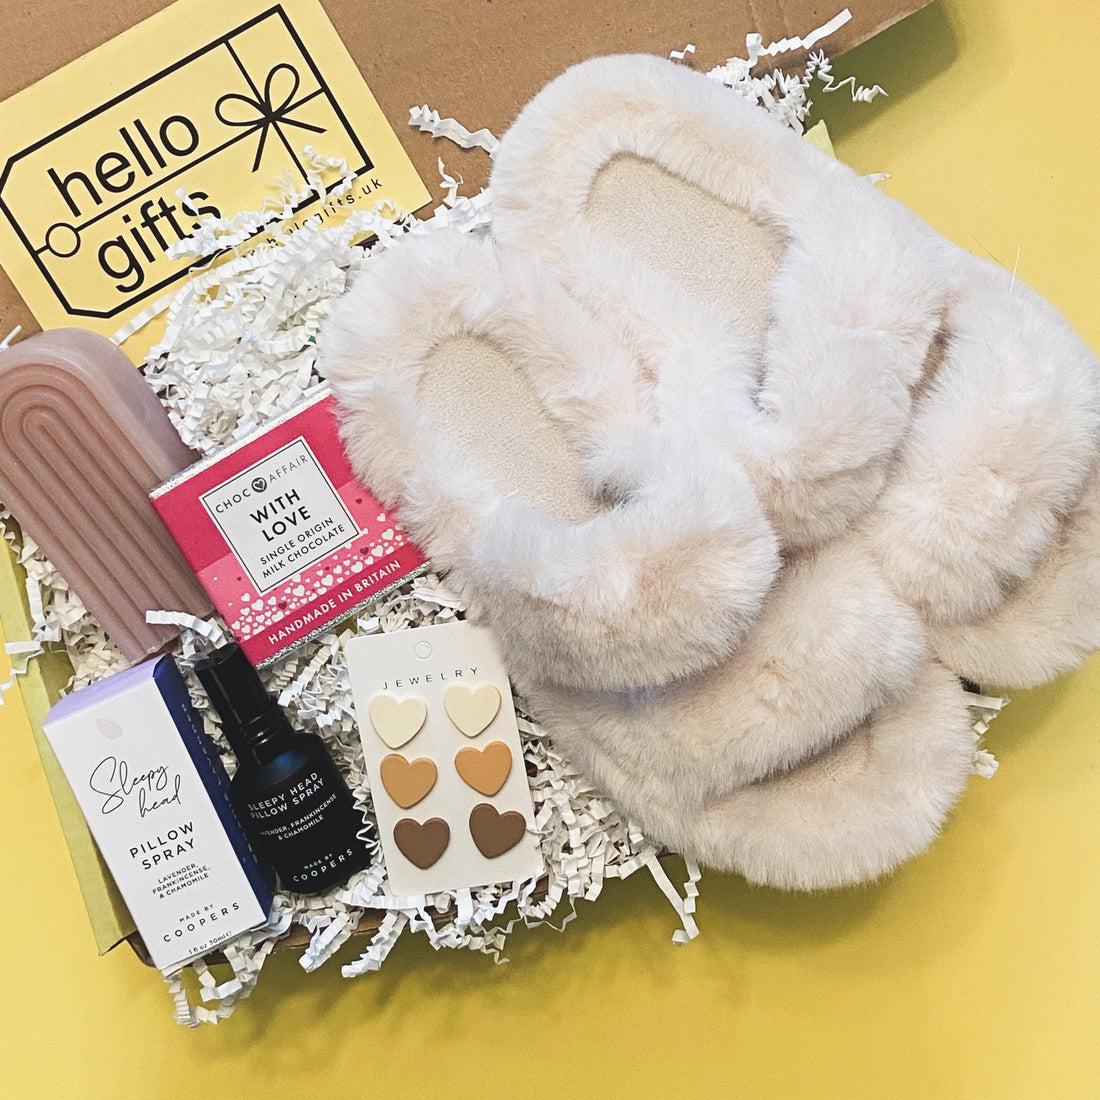 The Self Care Gift Box